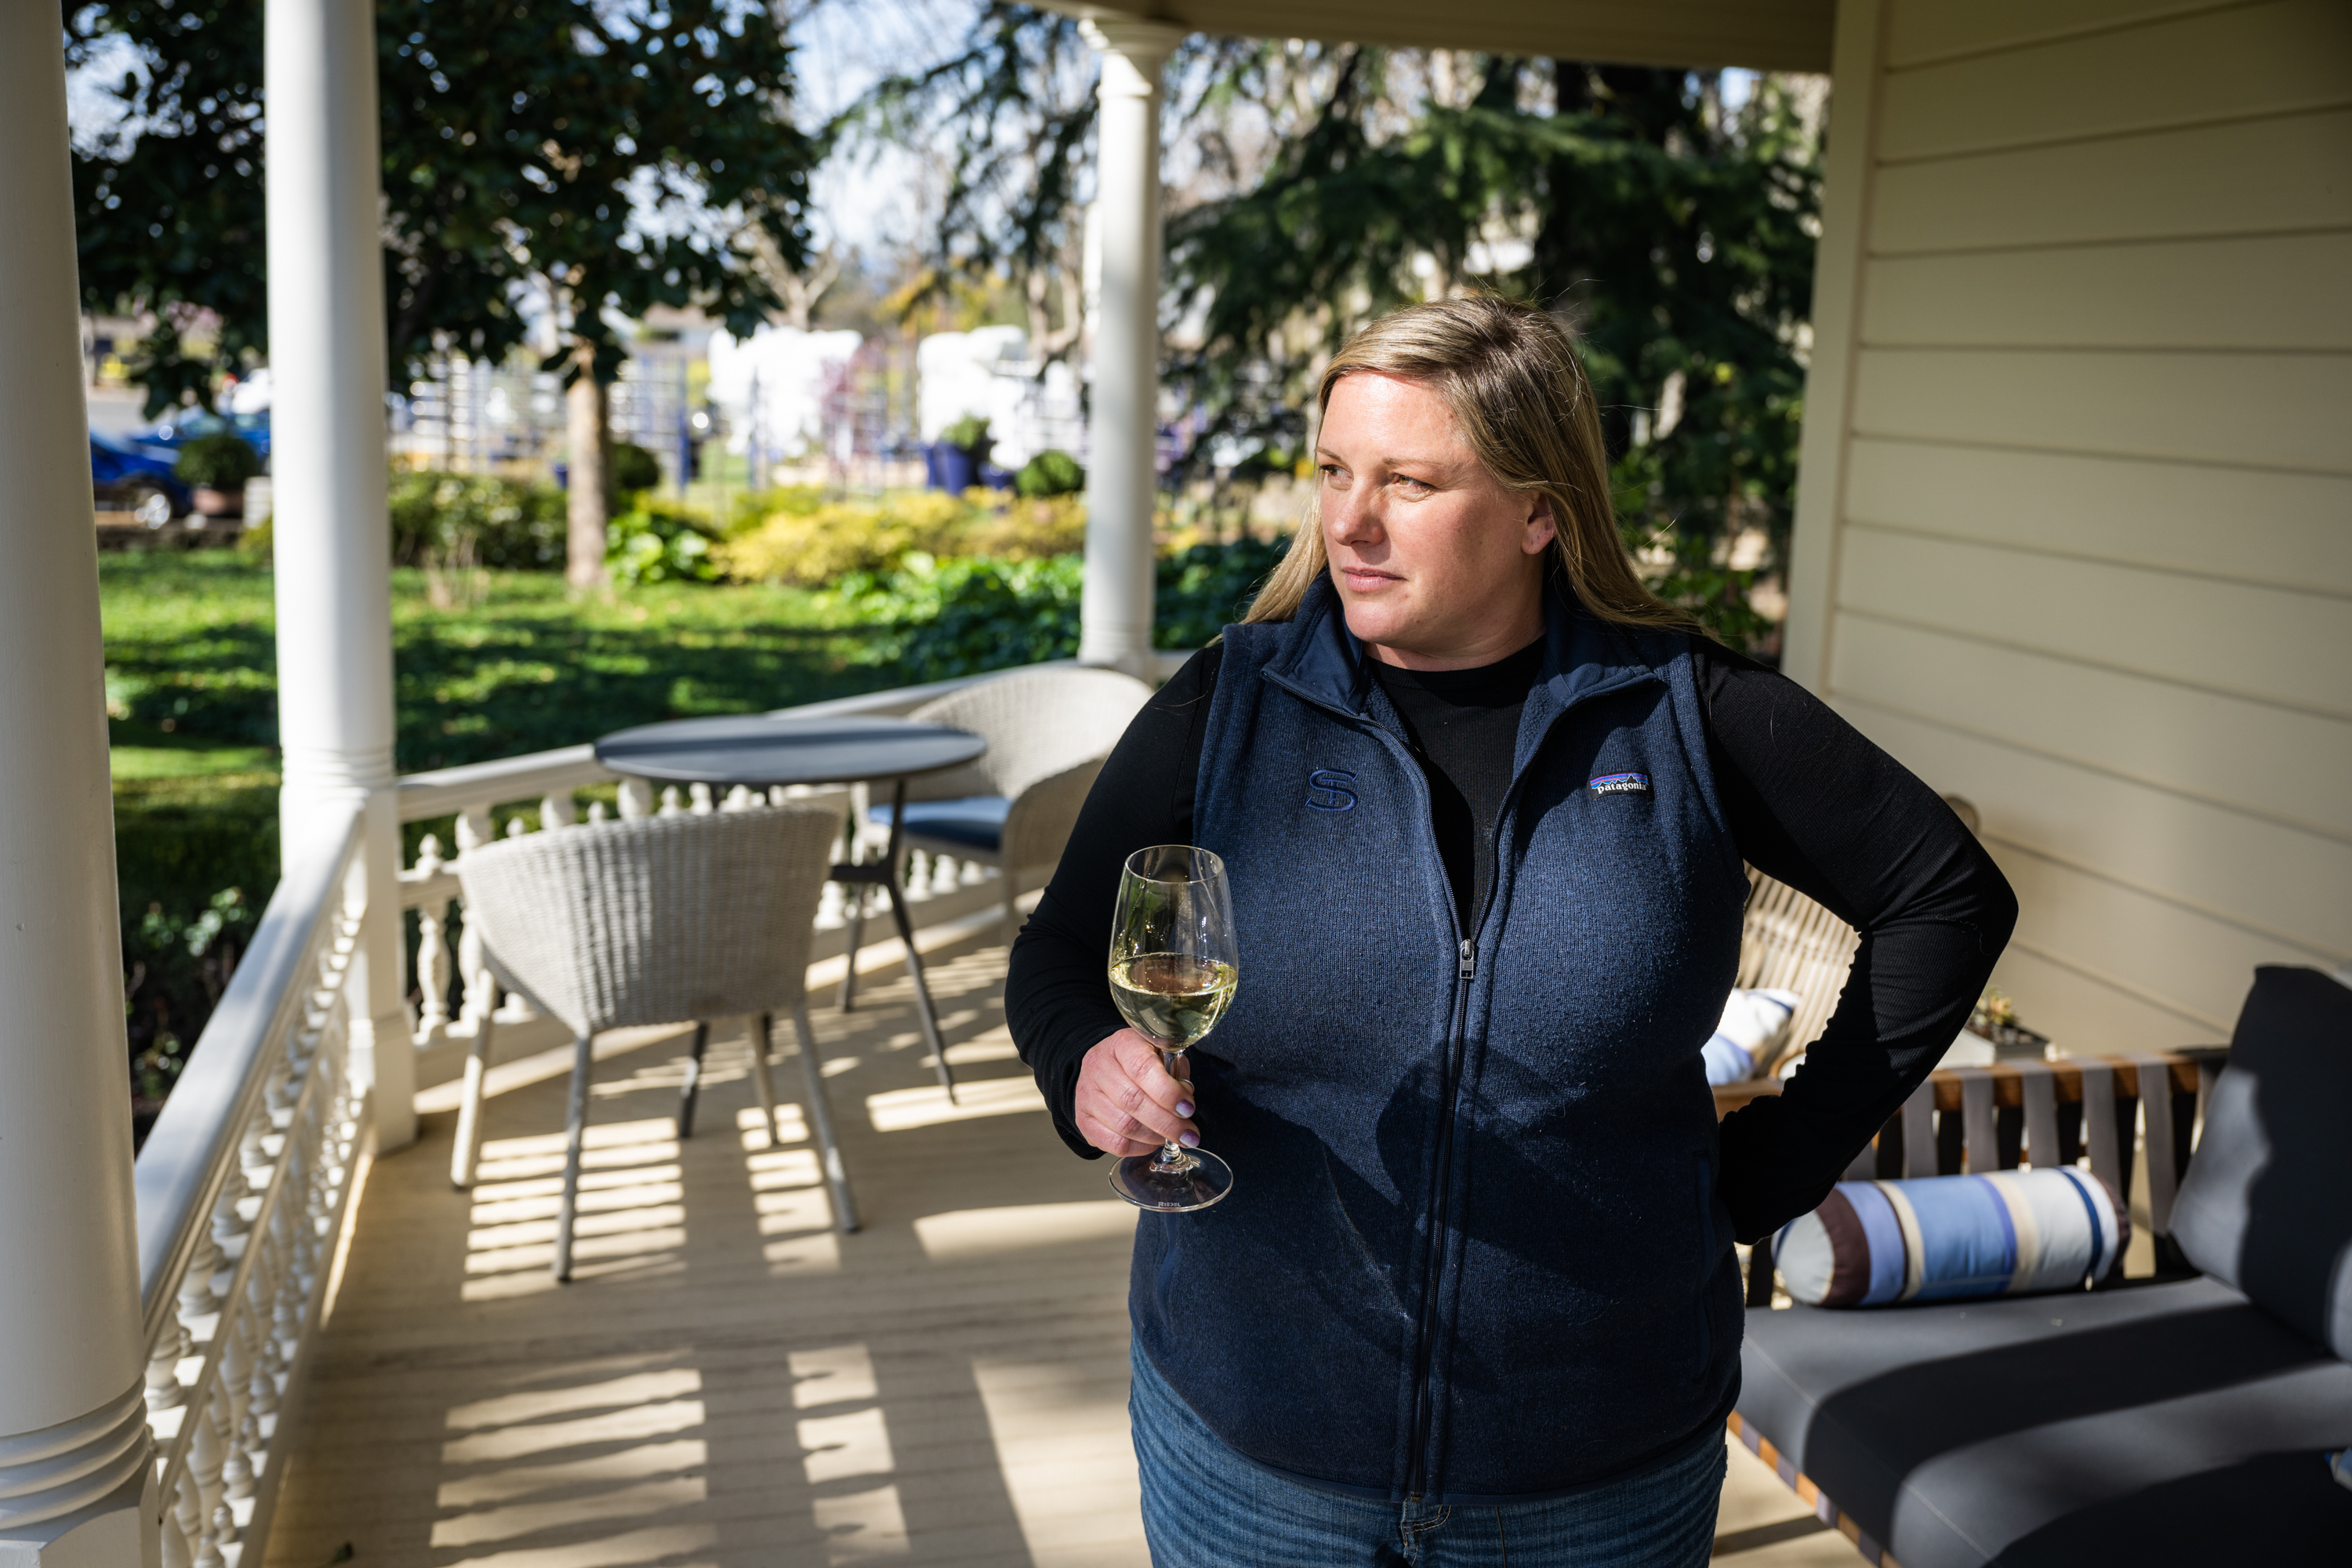 Winemaker Brooke Shenk on the porch of the historic Atkinson house at St. Supery